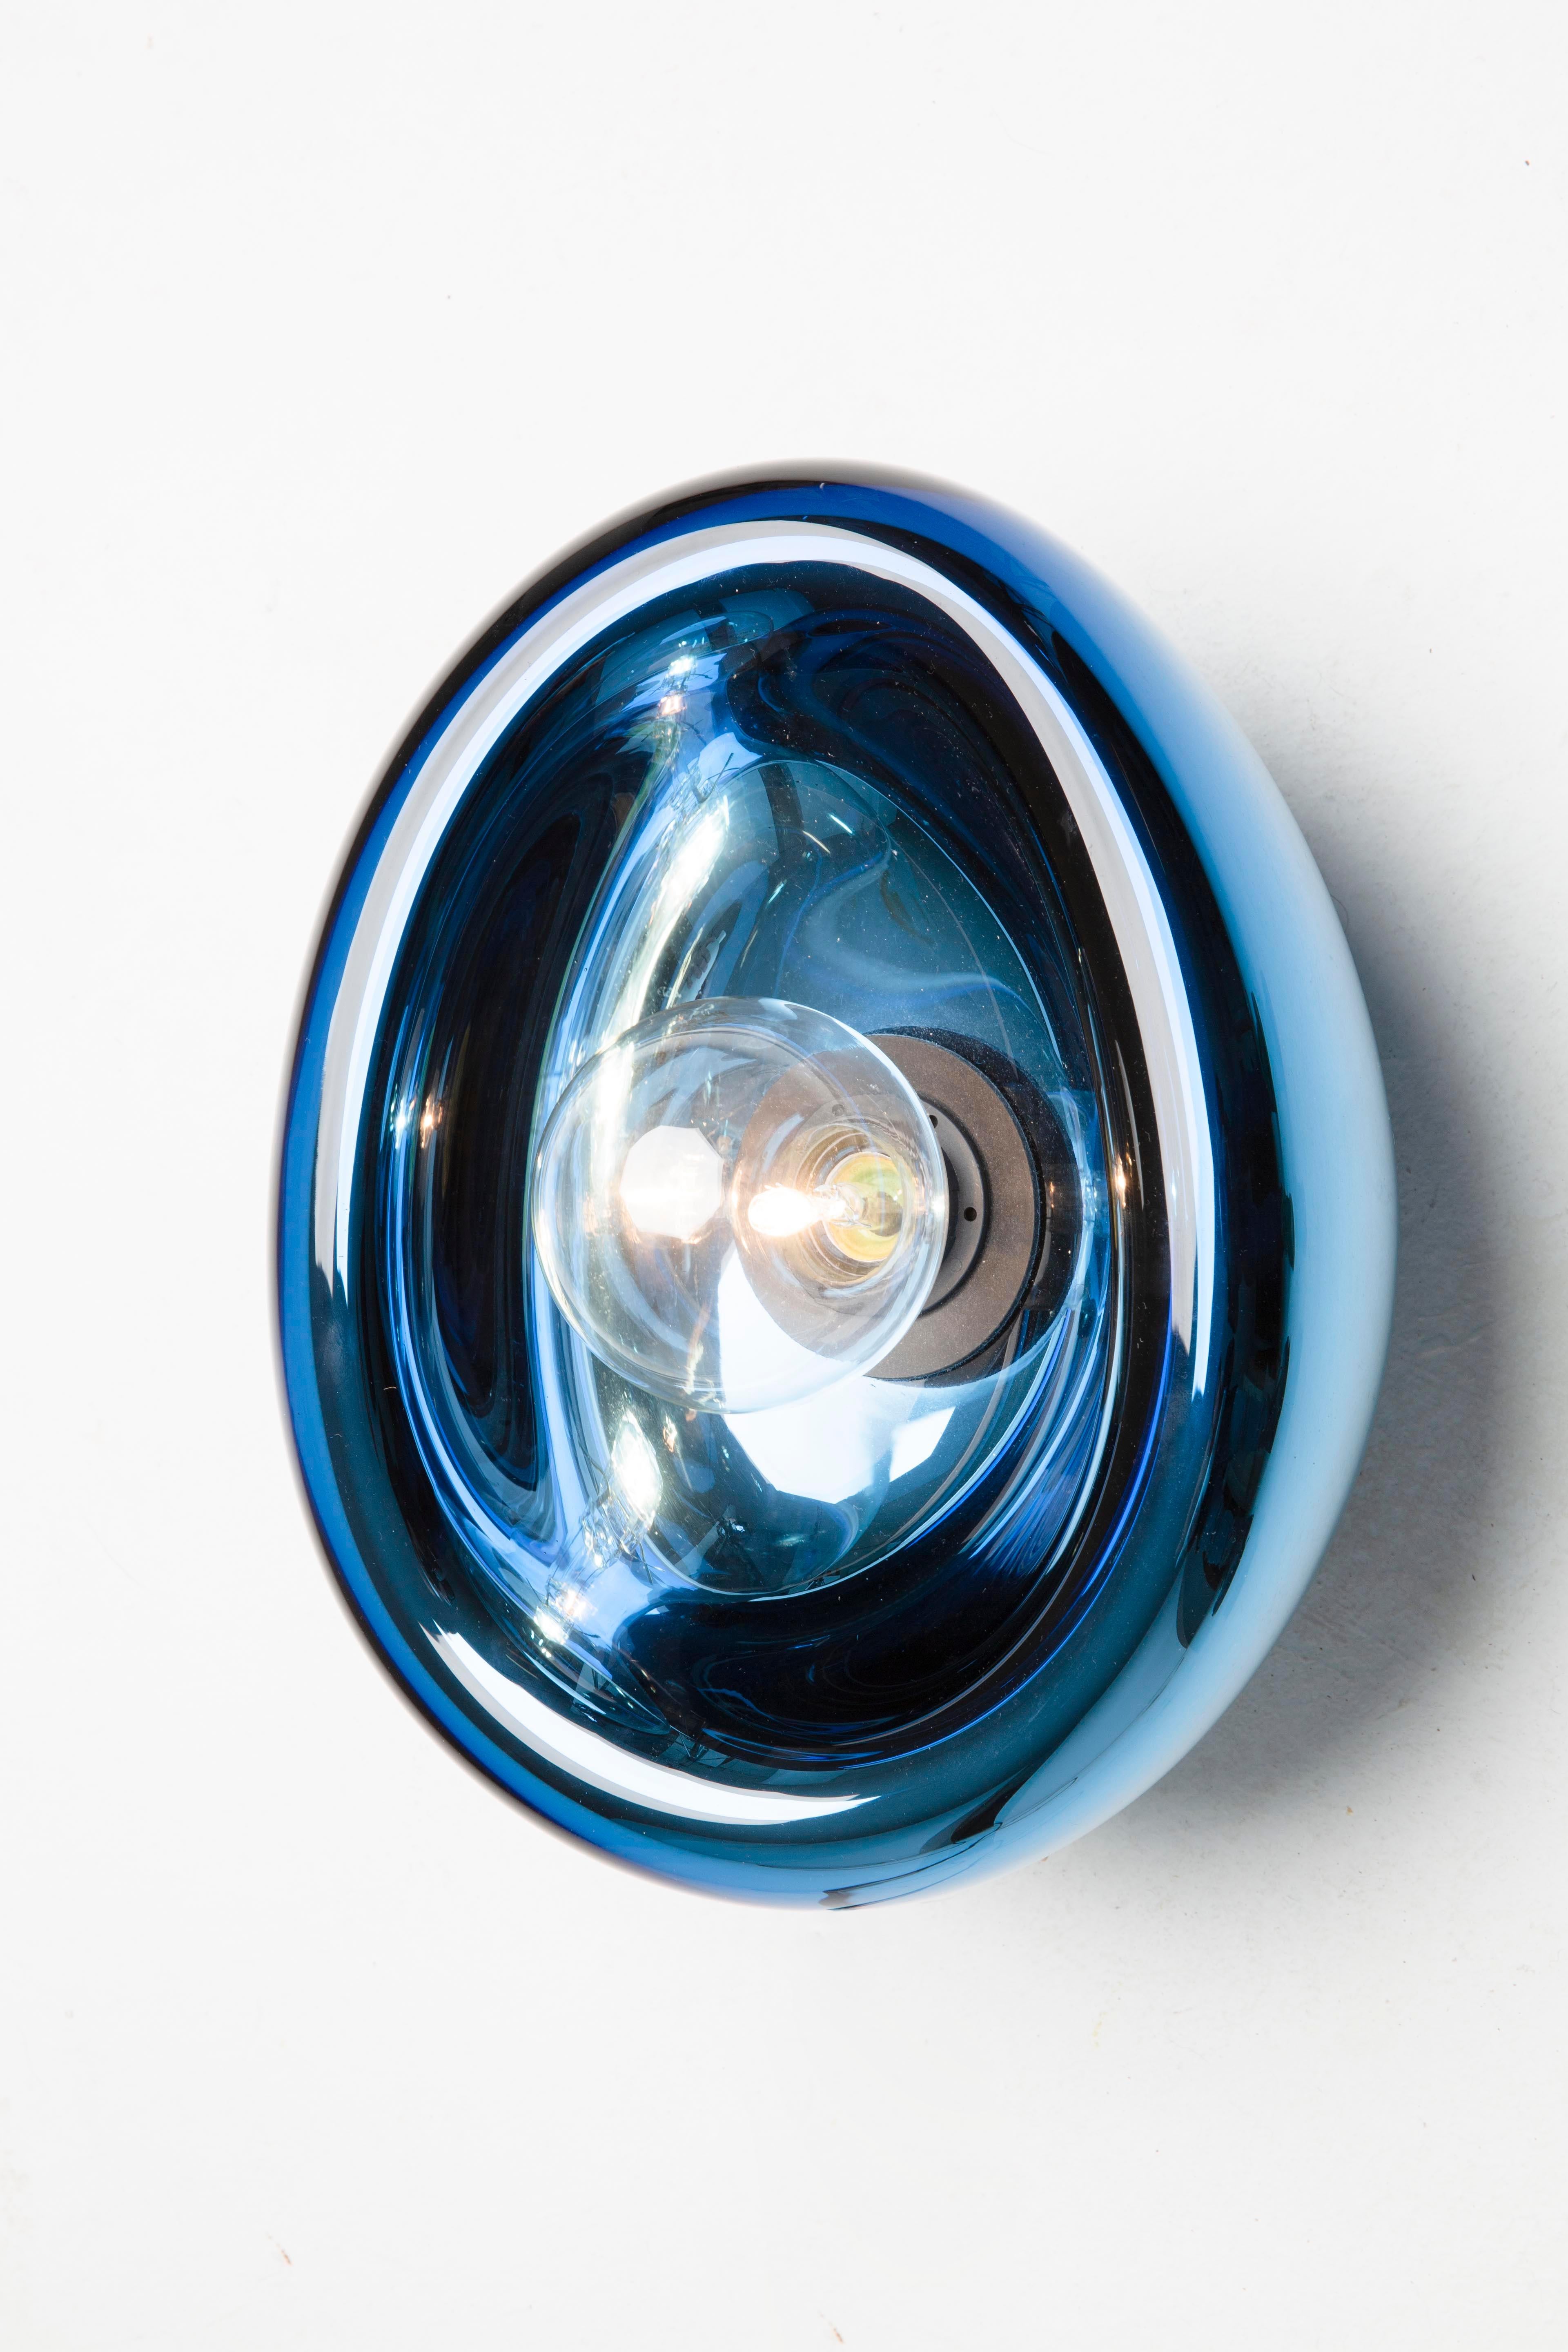 Big Aurum blue glass sconces by Alex de Witte
Dimensions: D 30 x H 40 cm
Materials: Mouth blown glass
It can be purchased as an ensemble or individual, in different dimensions and colors.


Aurum shows how Alex de Witte is able to convey